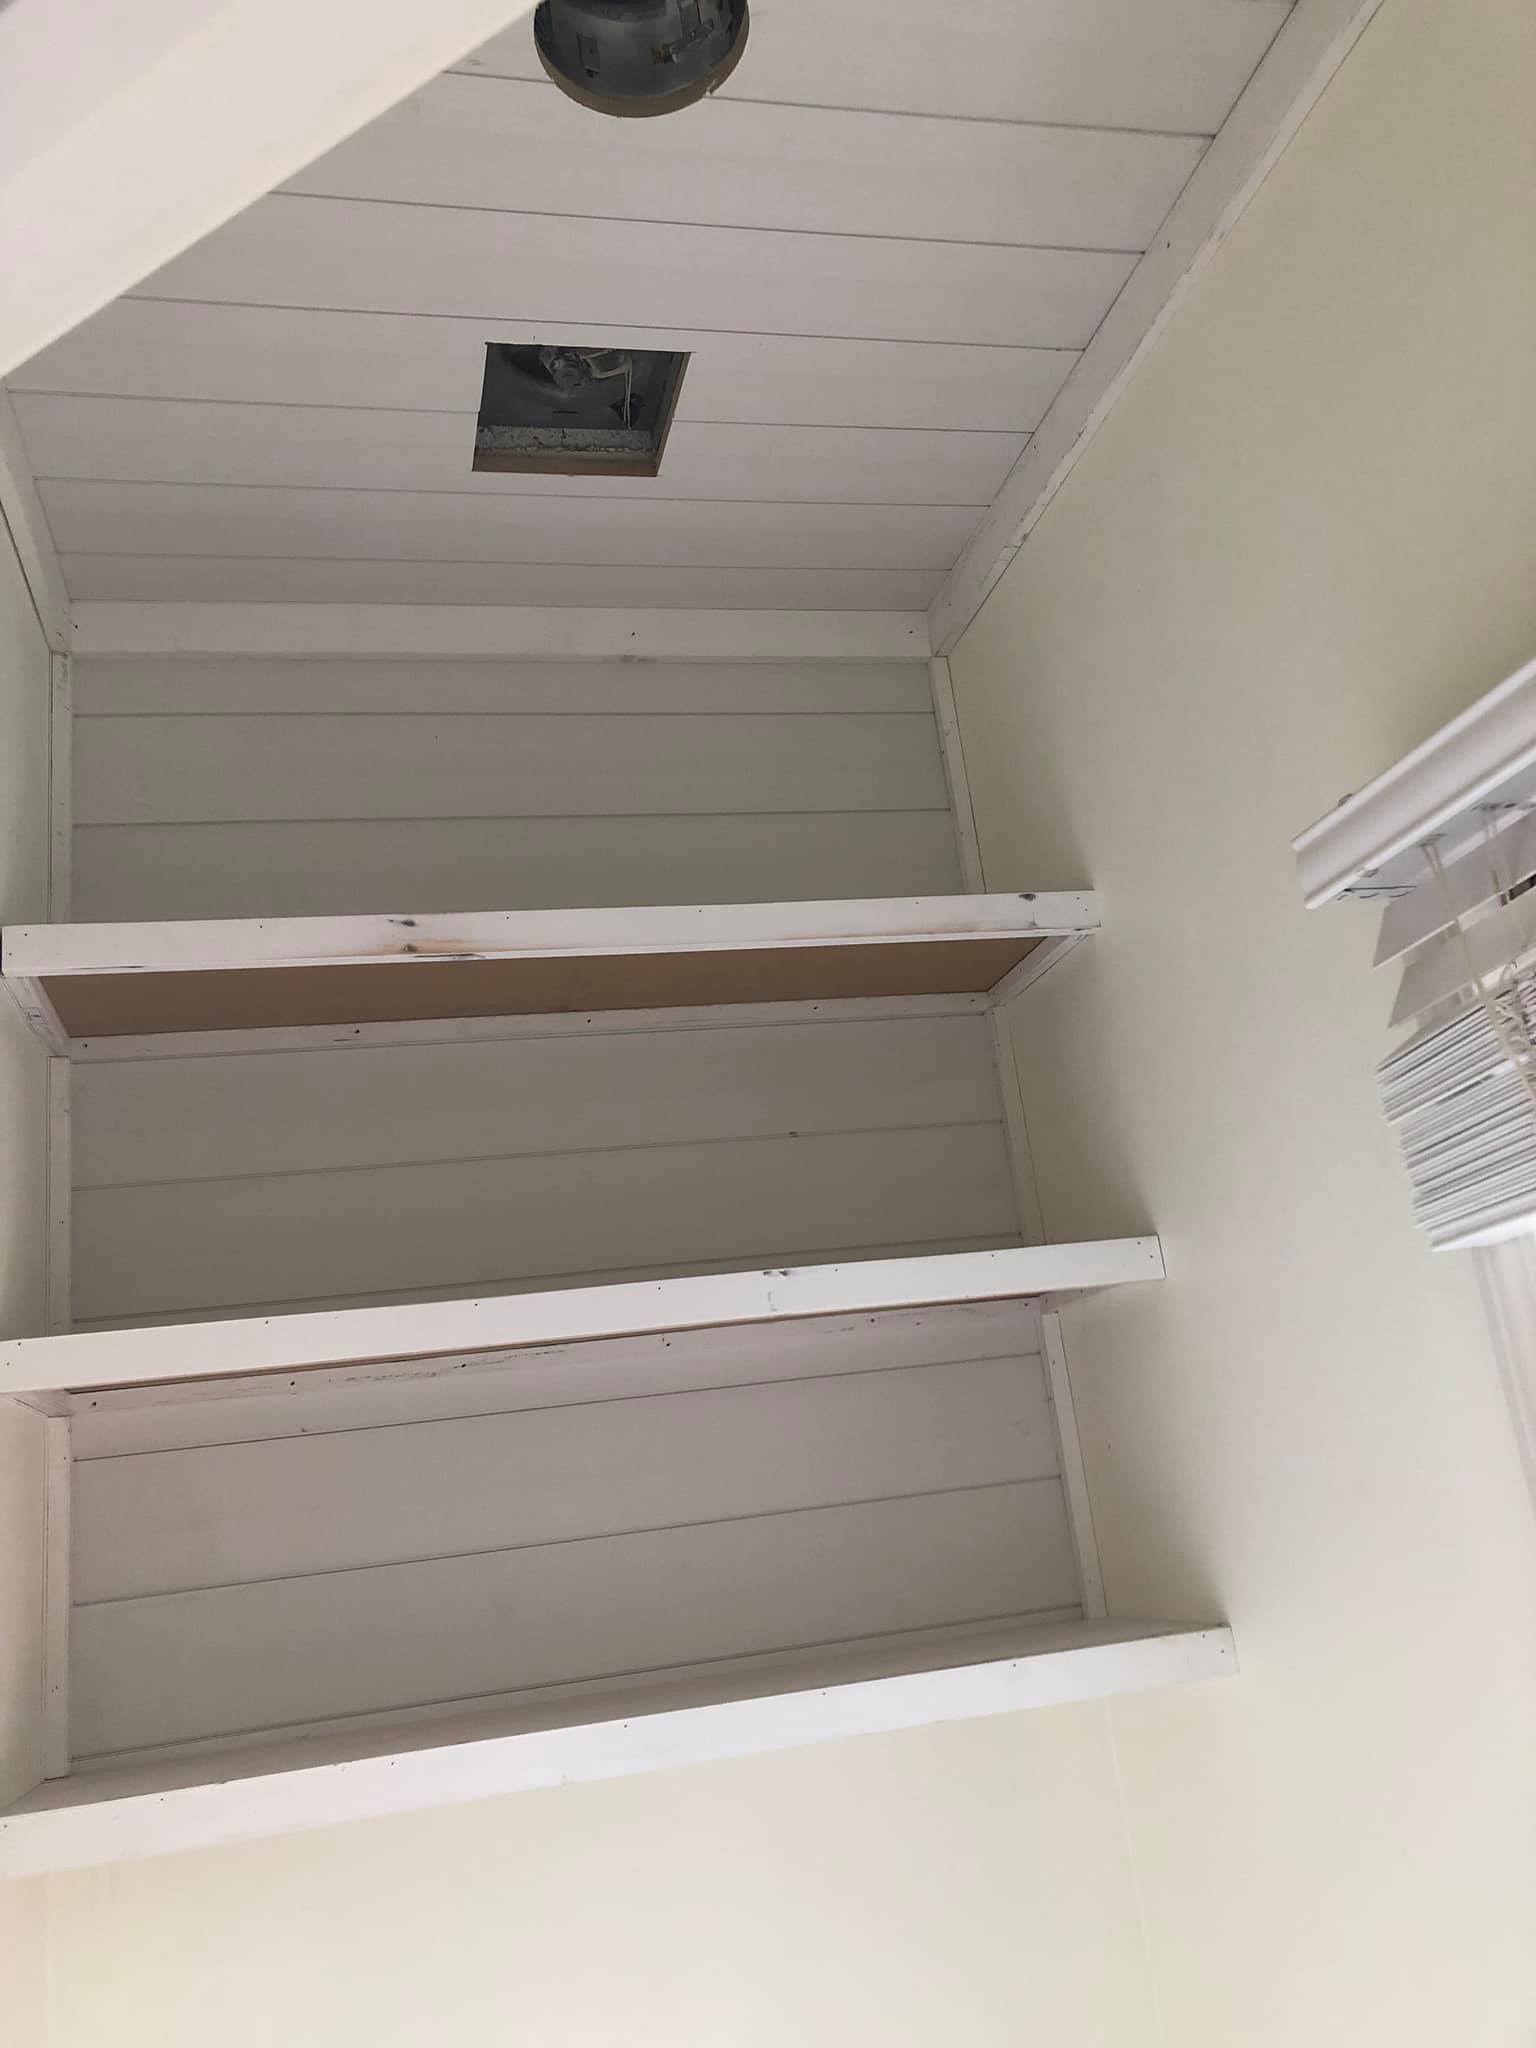 Tongue and Groove with Shiplap on Walls and Ceiling